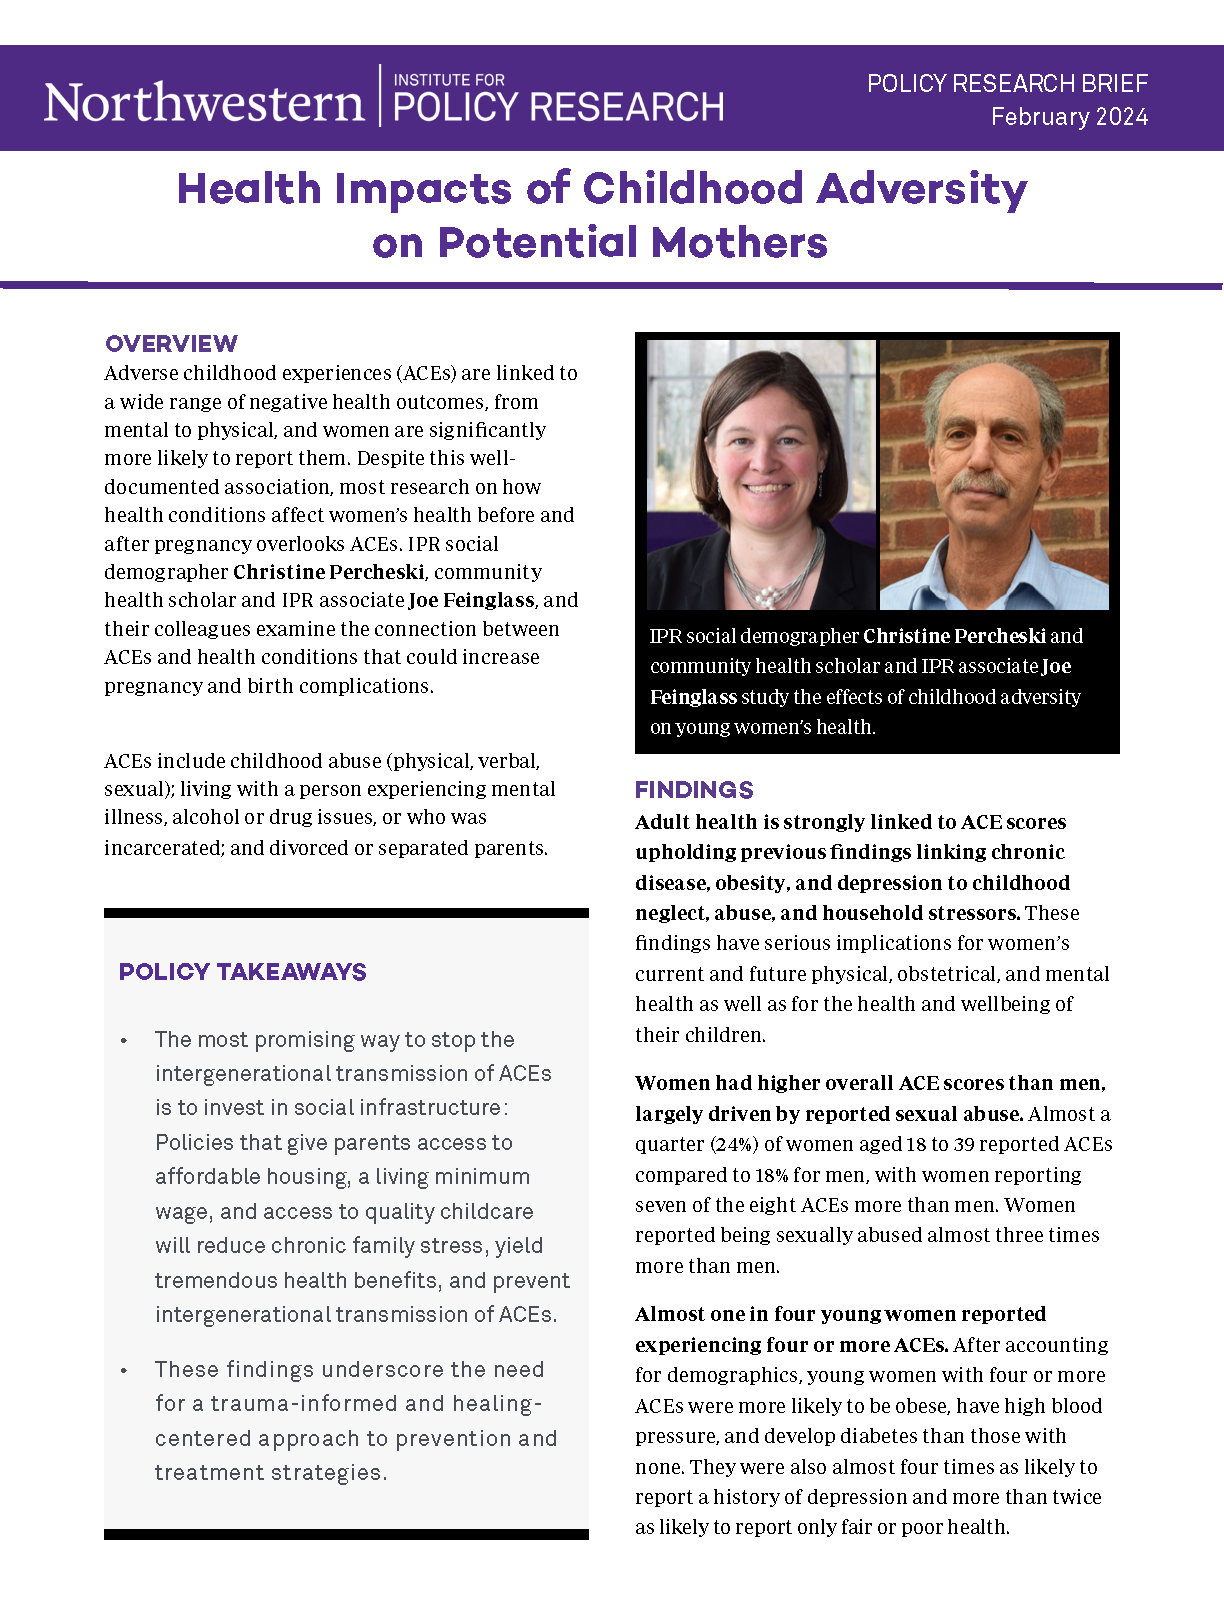 Health Impacts of Childhood Adversity on Potential Mothers